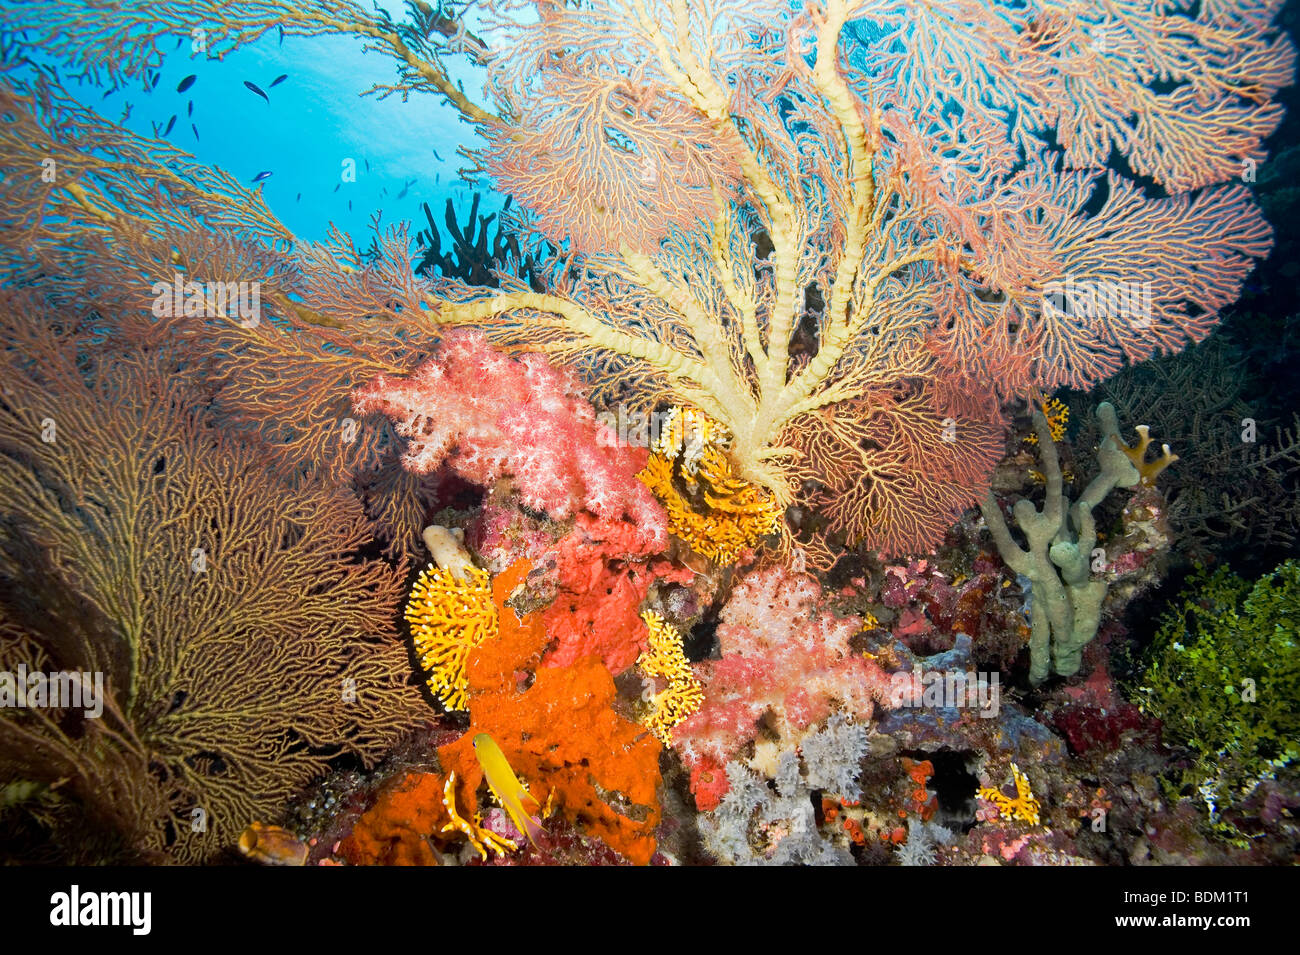 A bright and colorful tropical reef scene with fans, soft corals and fish Stock Photo